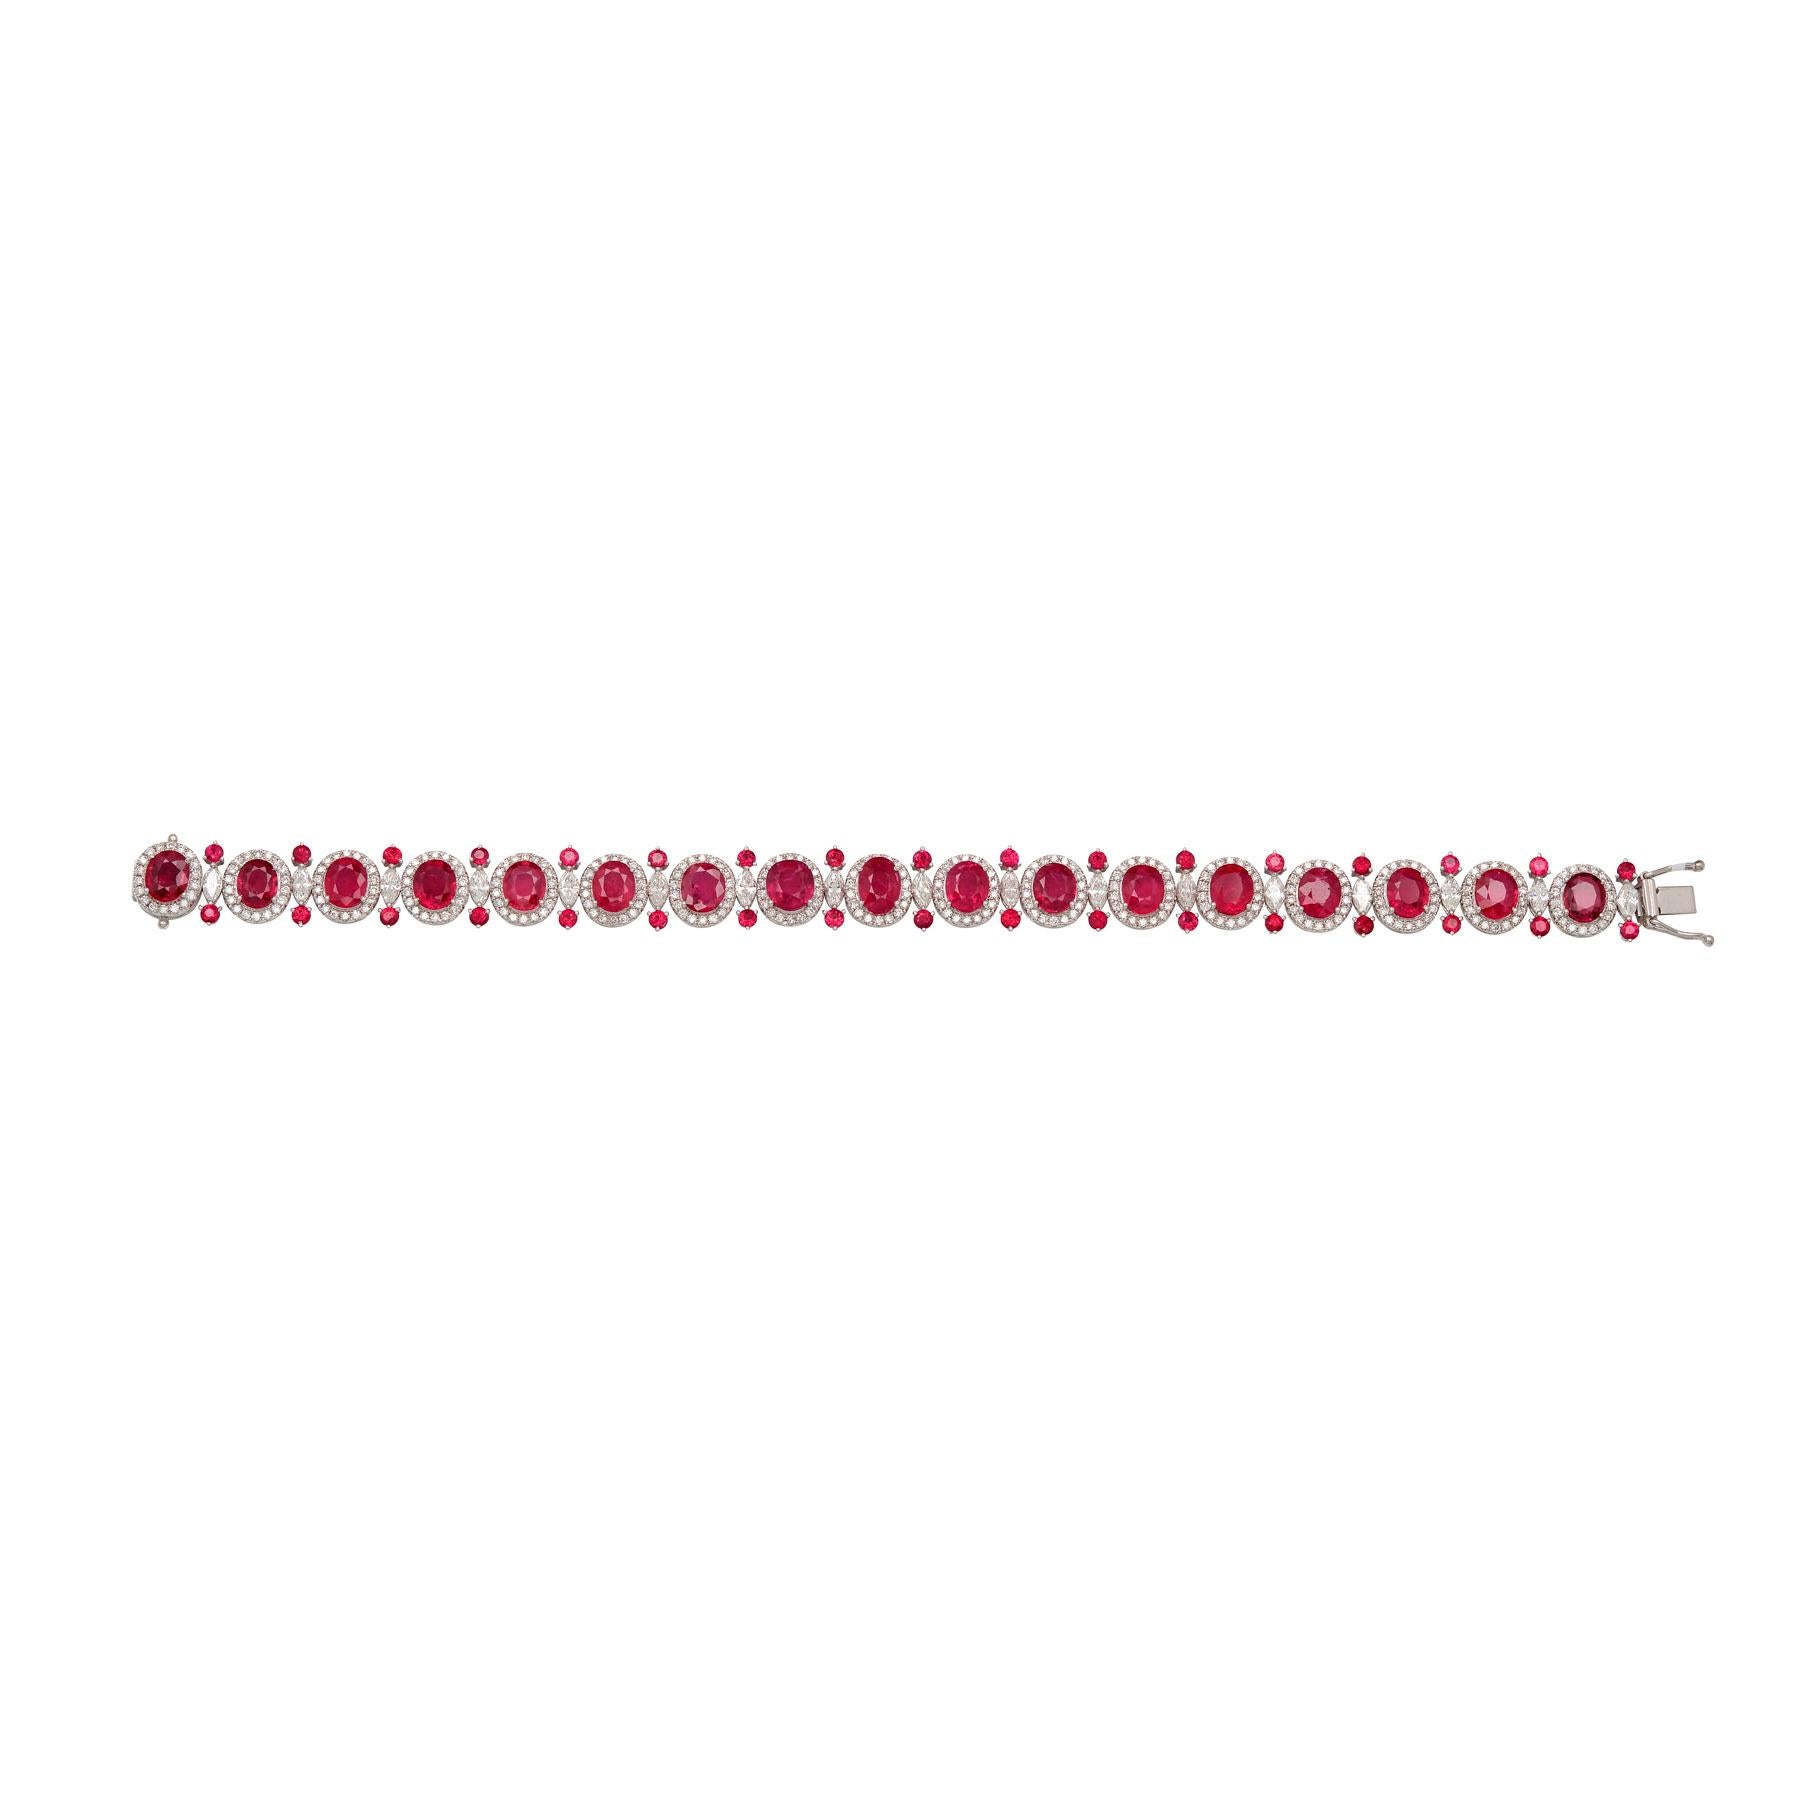 18K White Gold
Ruby: 15.10ct total weight.
Diamond: 3.37ct total weight.
All diamonds are G-H/SI stones.